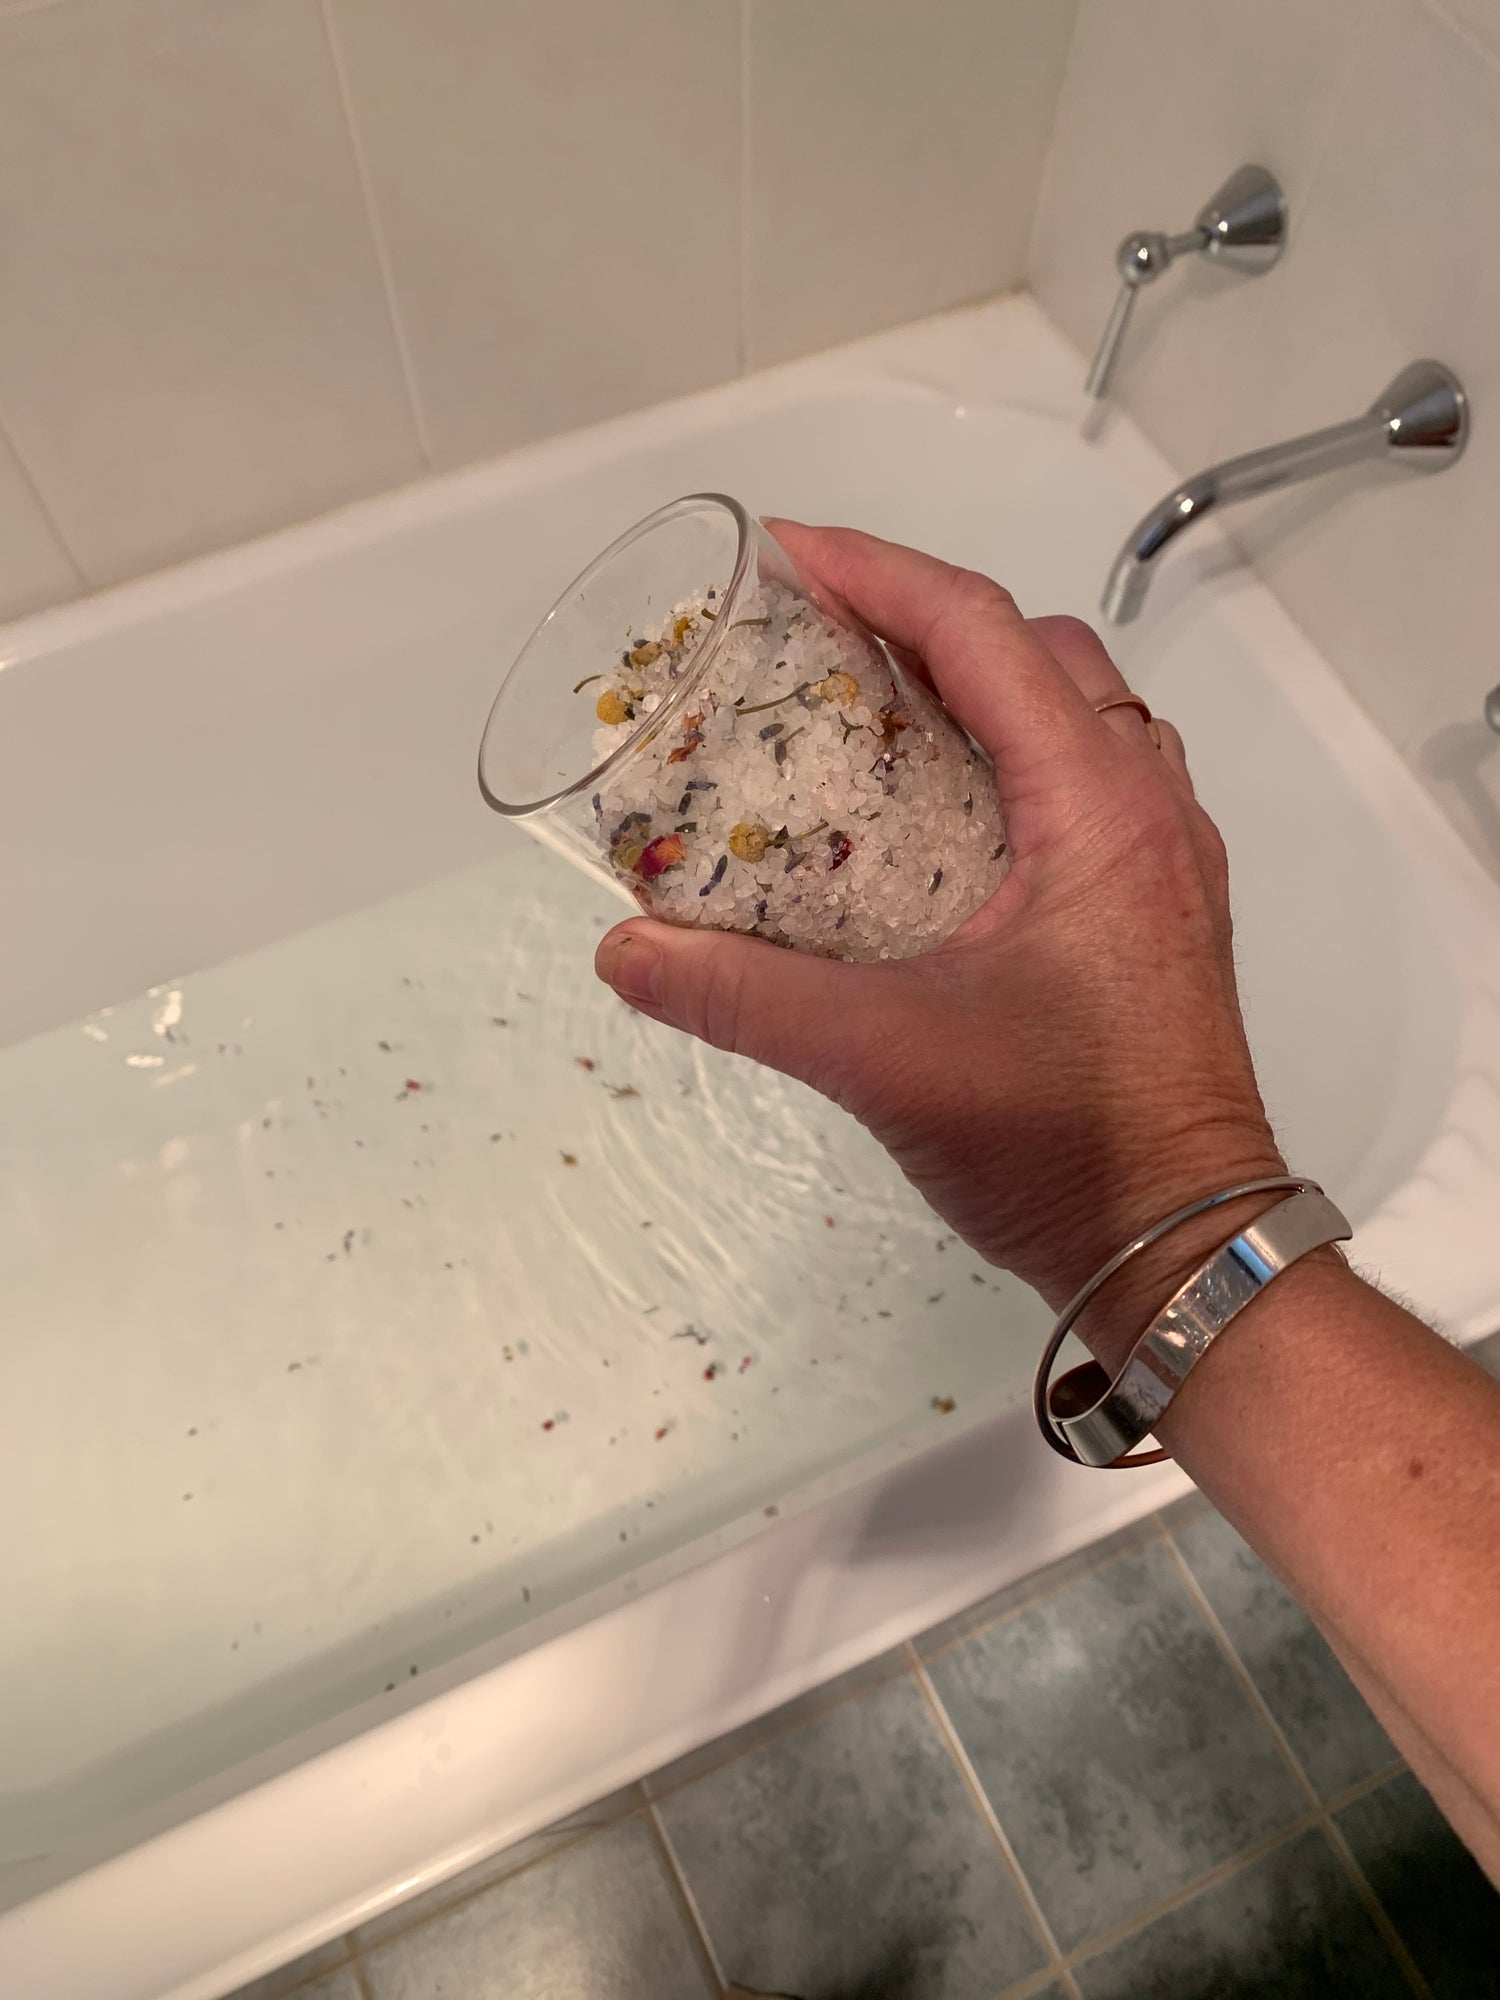 A Glass jar  of  "relax" bath salts being sprinkled into the bath.